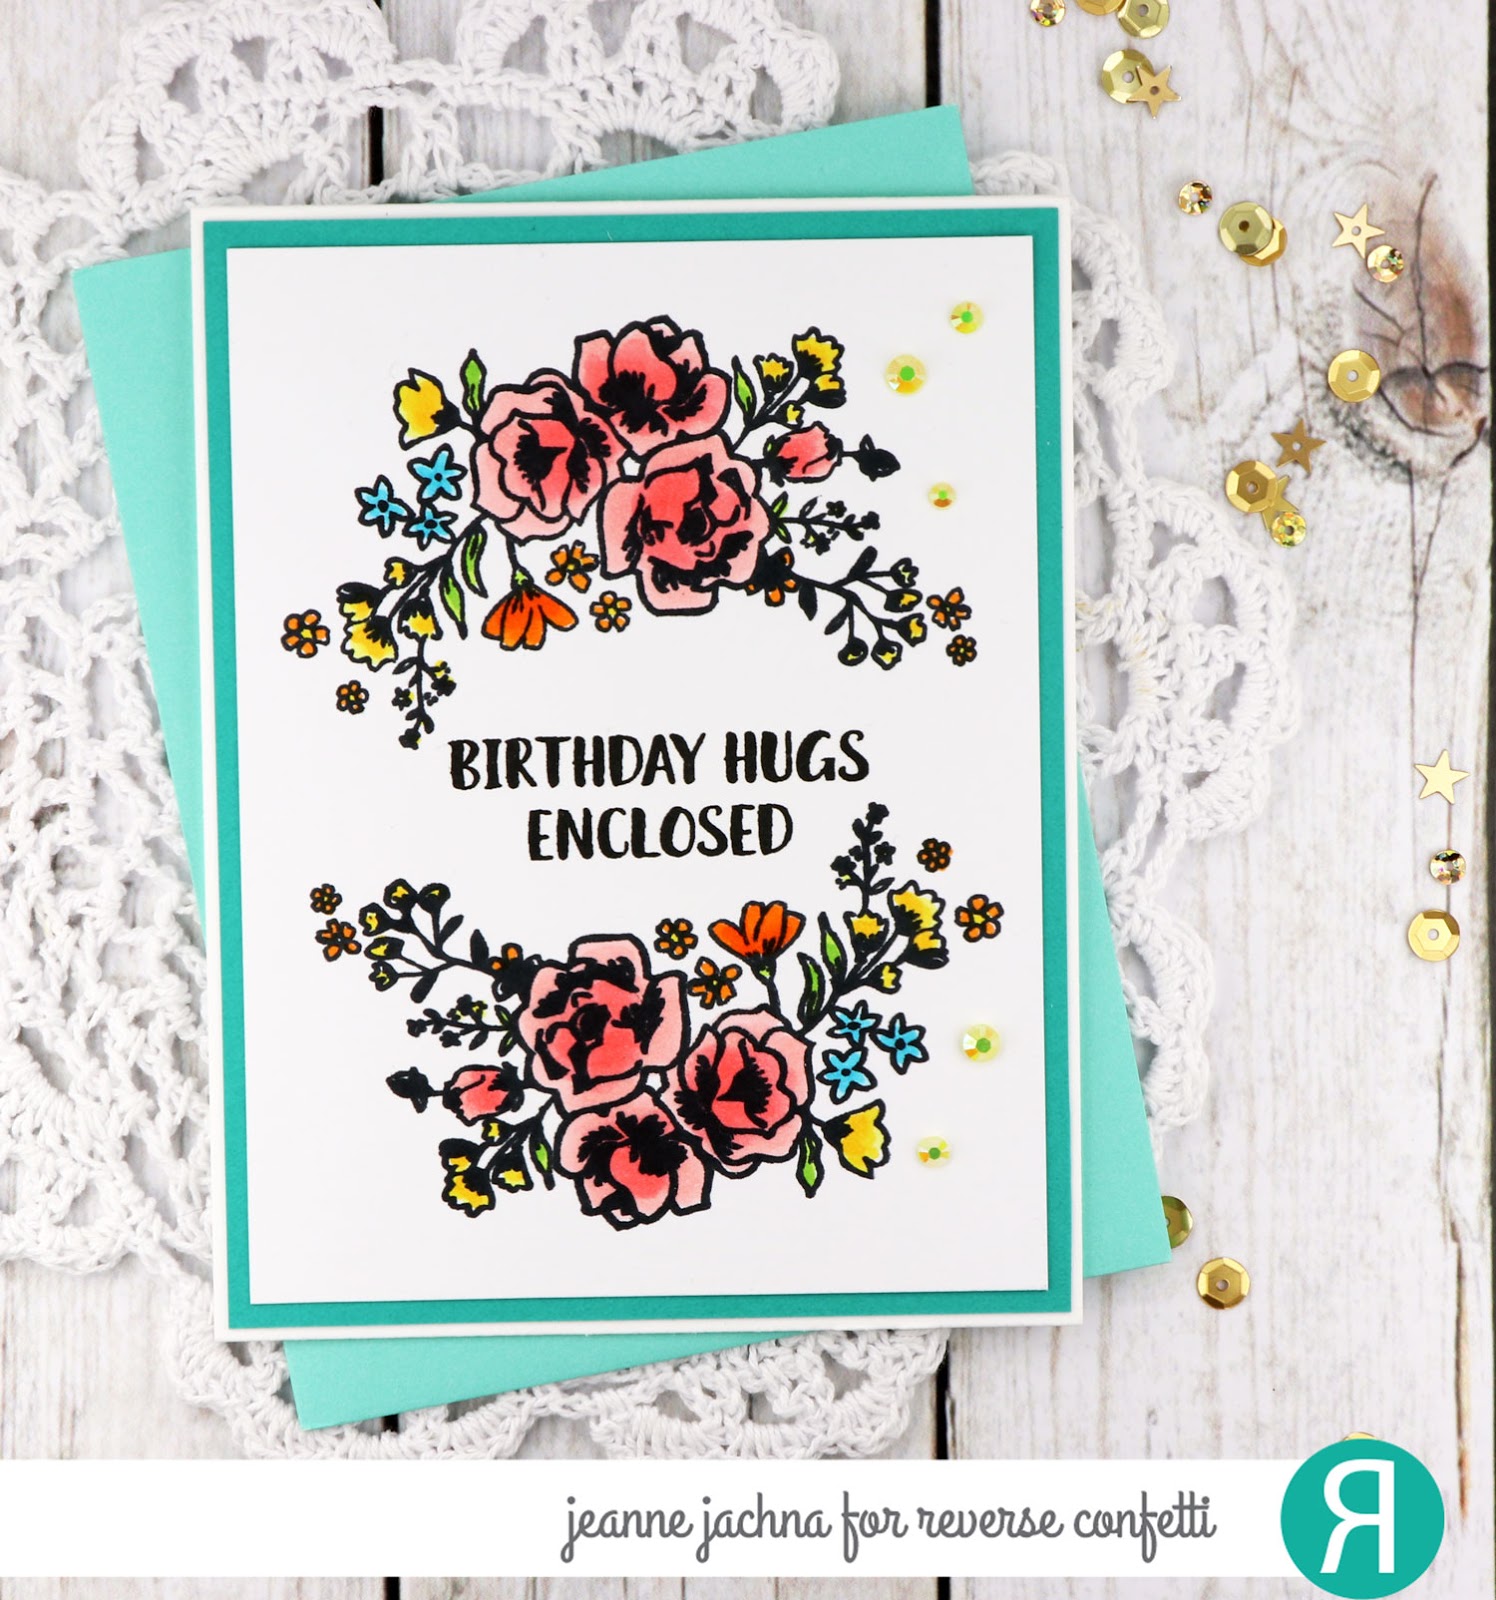 How to Make a Happy Birthday Card by Jeanne - Simply Stamps How-To